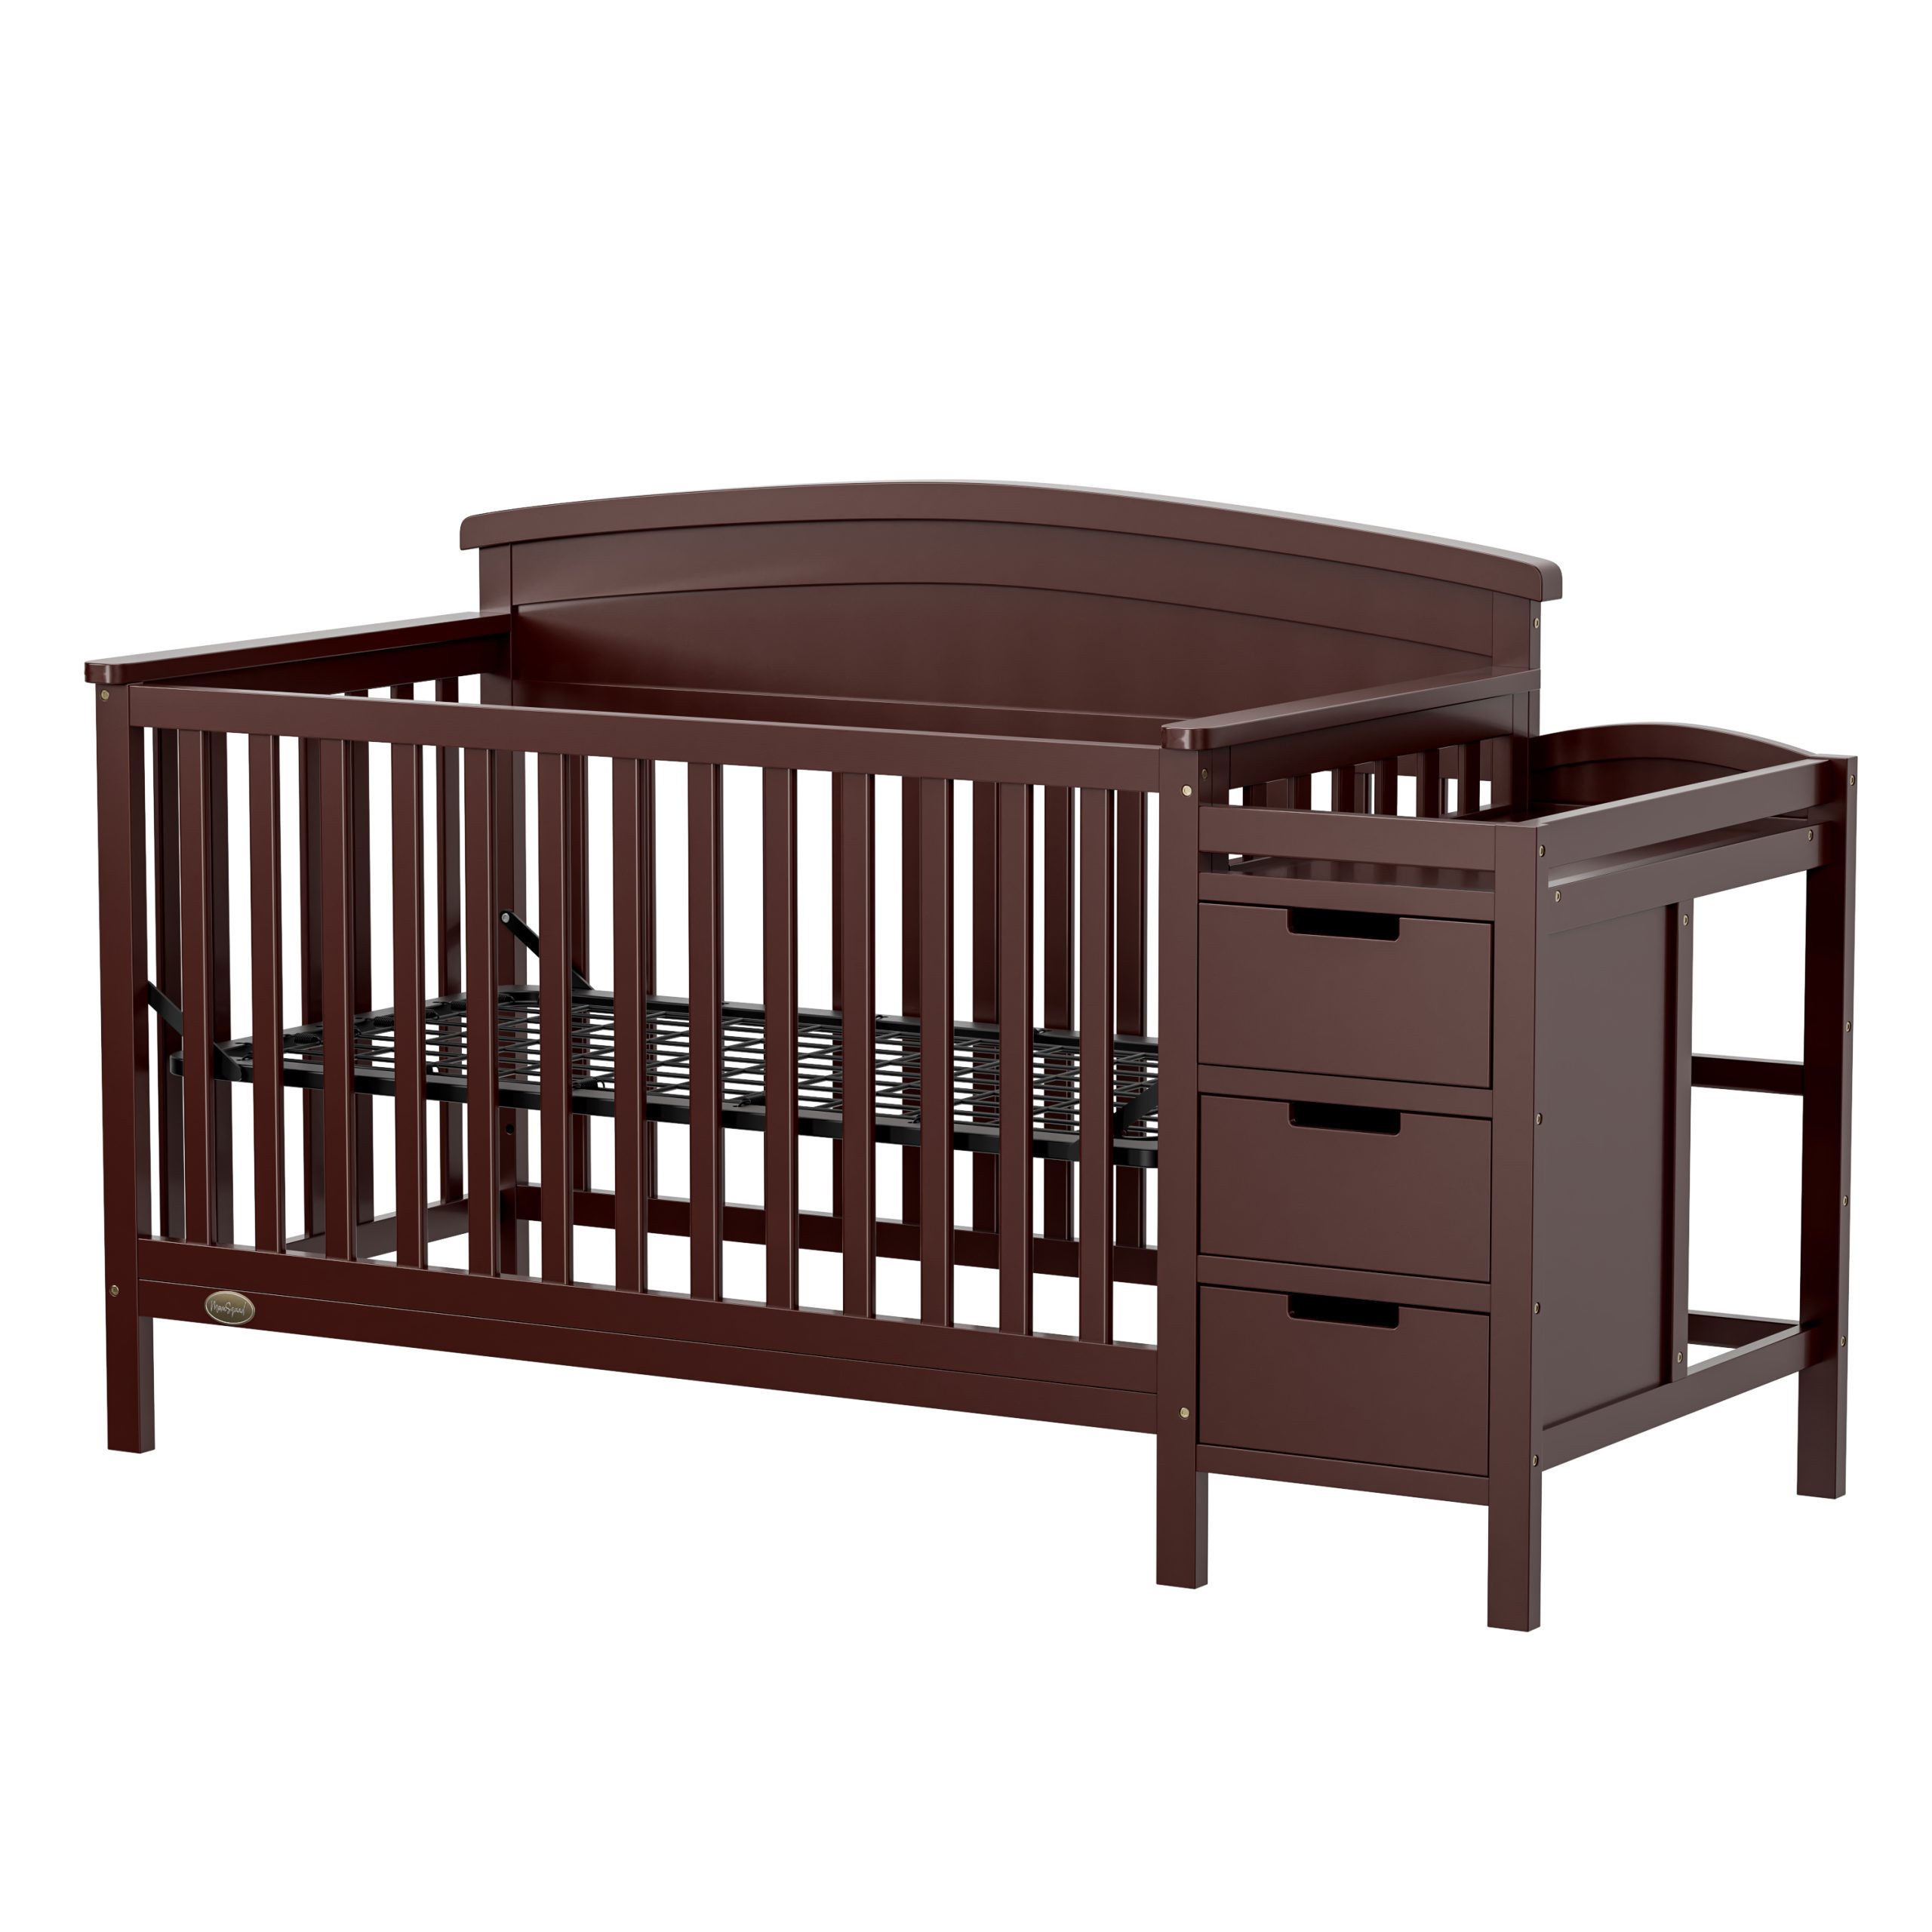 Adjustable Wooden infant bed with drawers WBB1221-17s